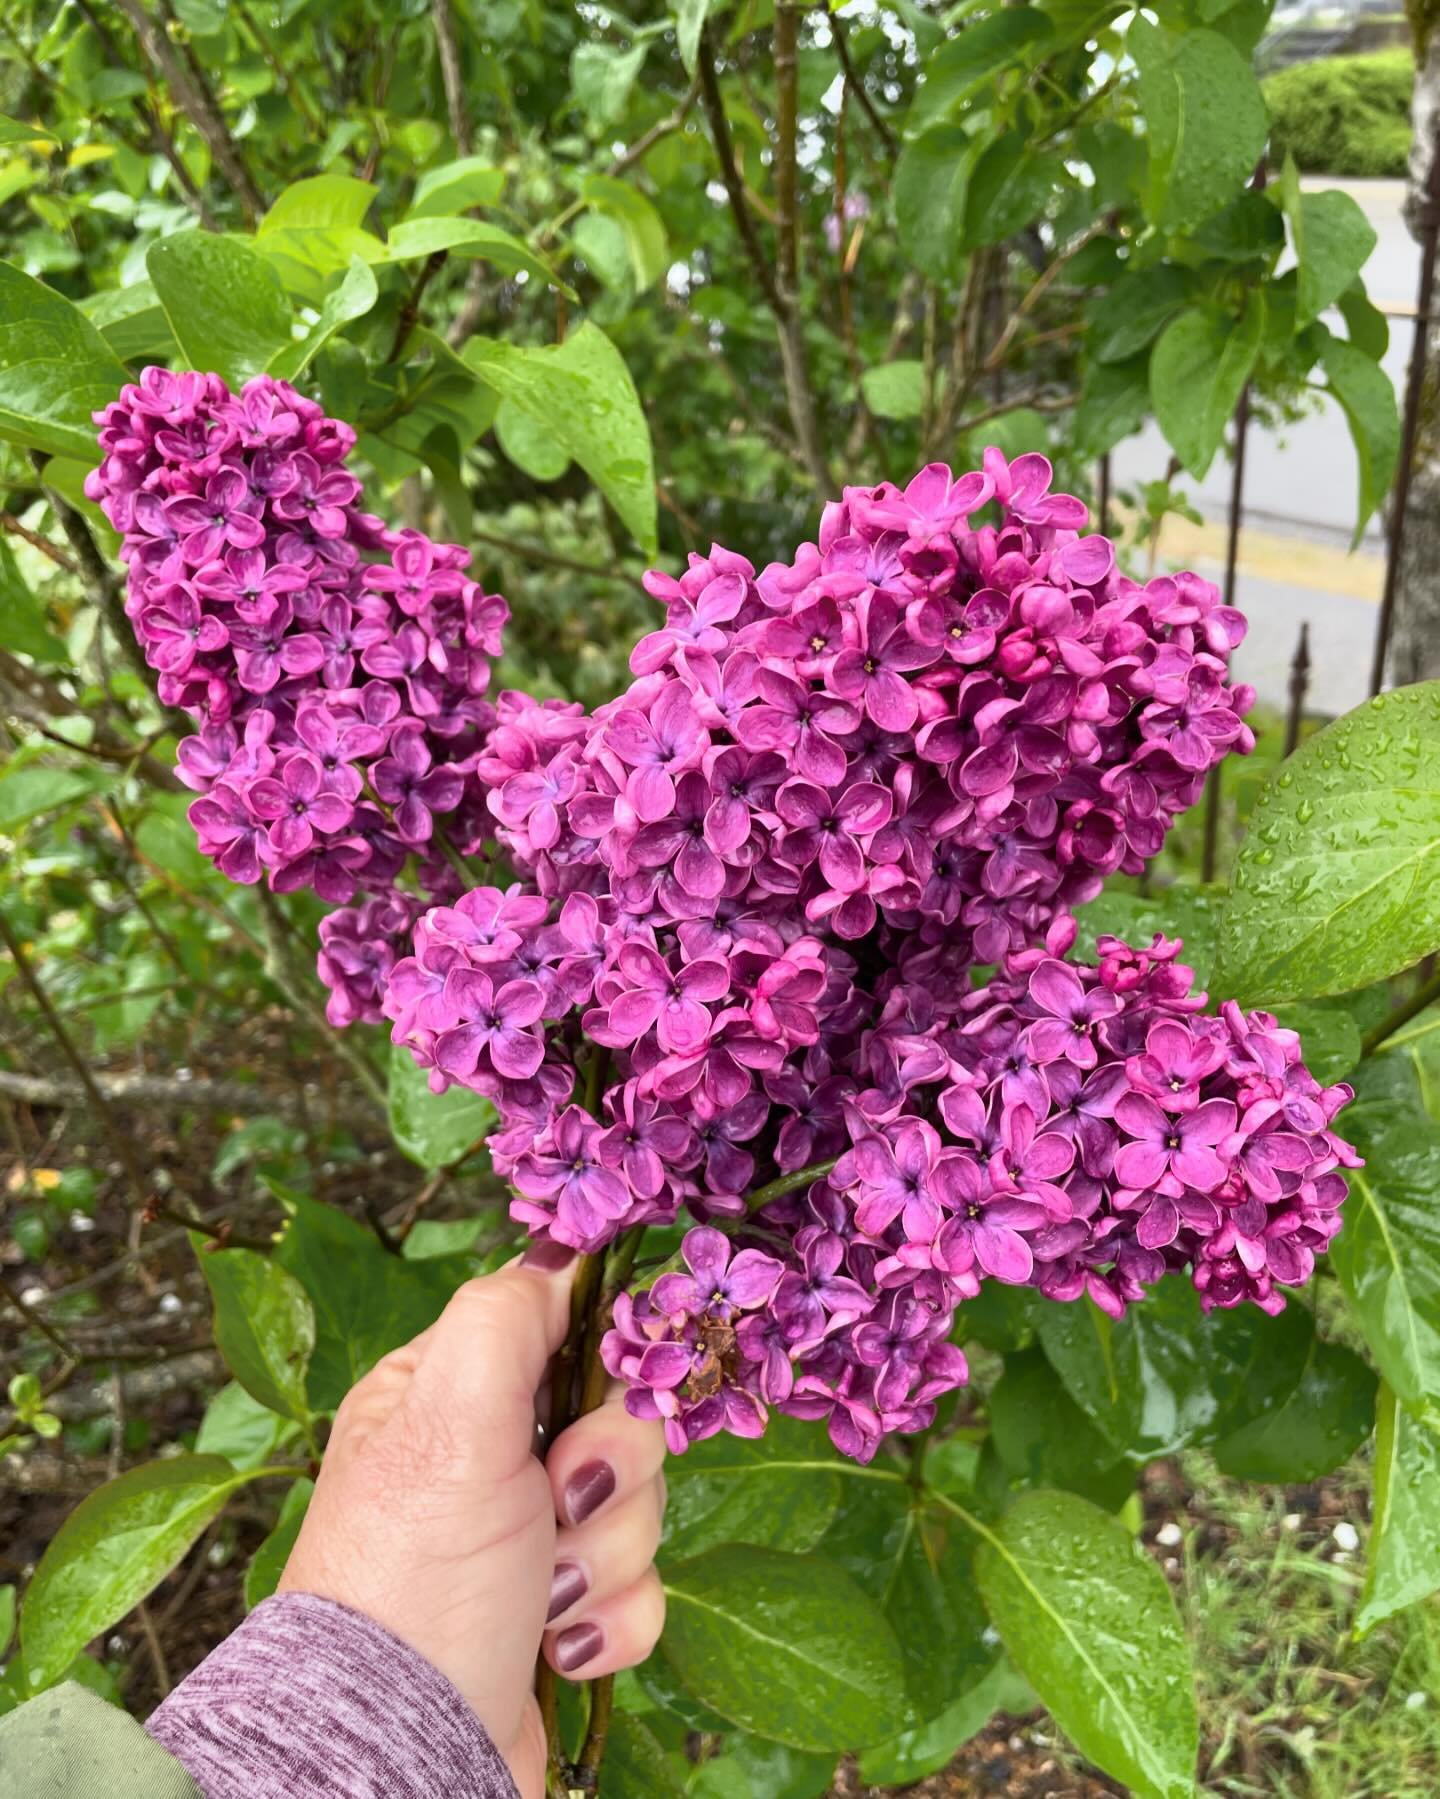 Being selfish today, after a rainy morning walk, I decided not to let the rain have these. Today they are mine  in the house. The warmth inside gently releasing their incredible fragrance. 

#lilacs
#naturesaromatherapy
#rainydaywalk 
#rainydaygarden